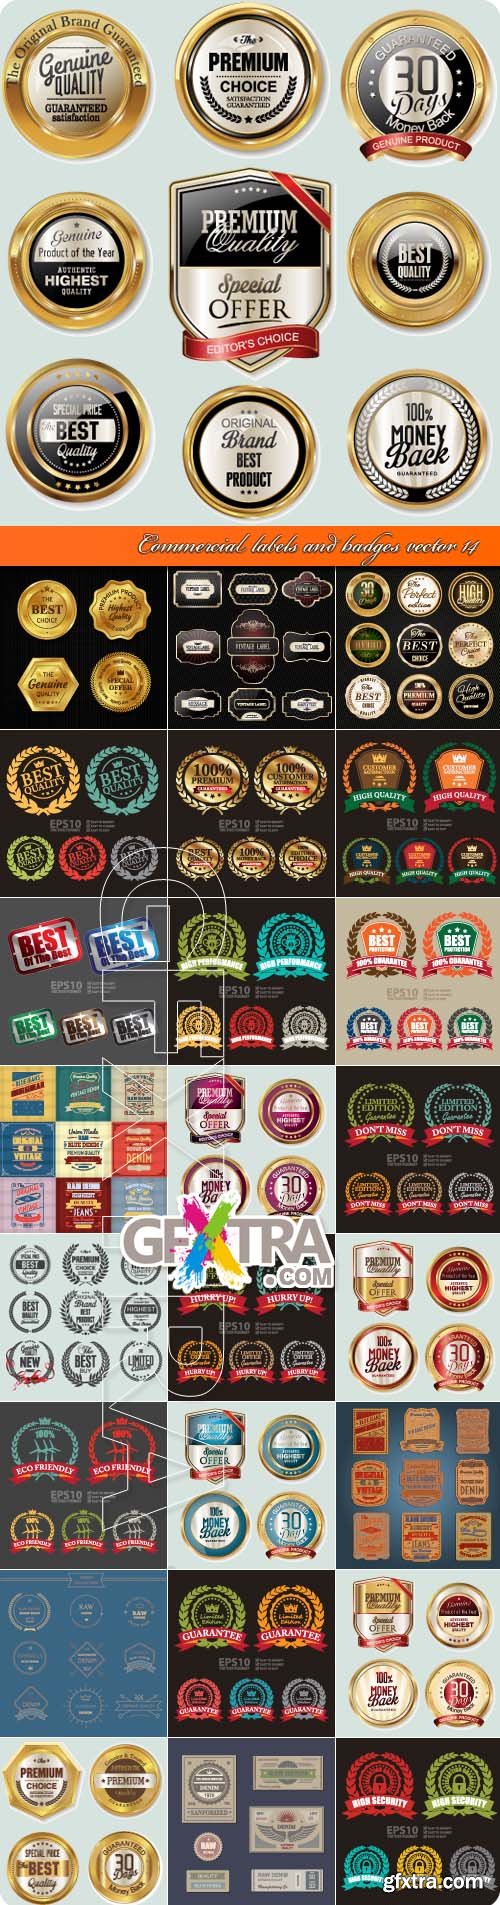 Commercial labels and badges vector 14